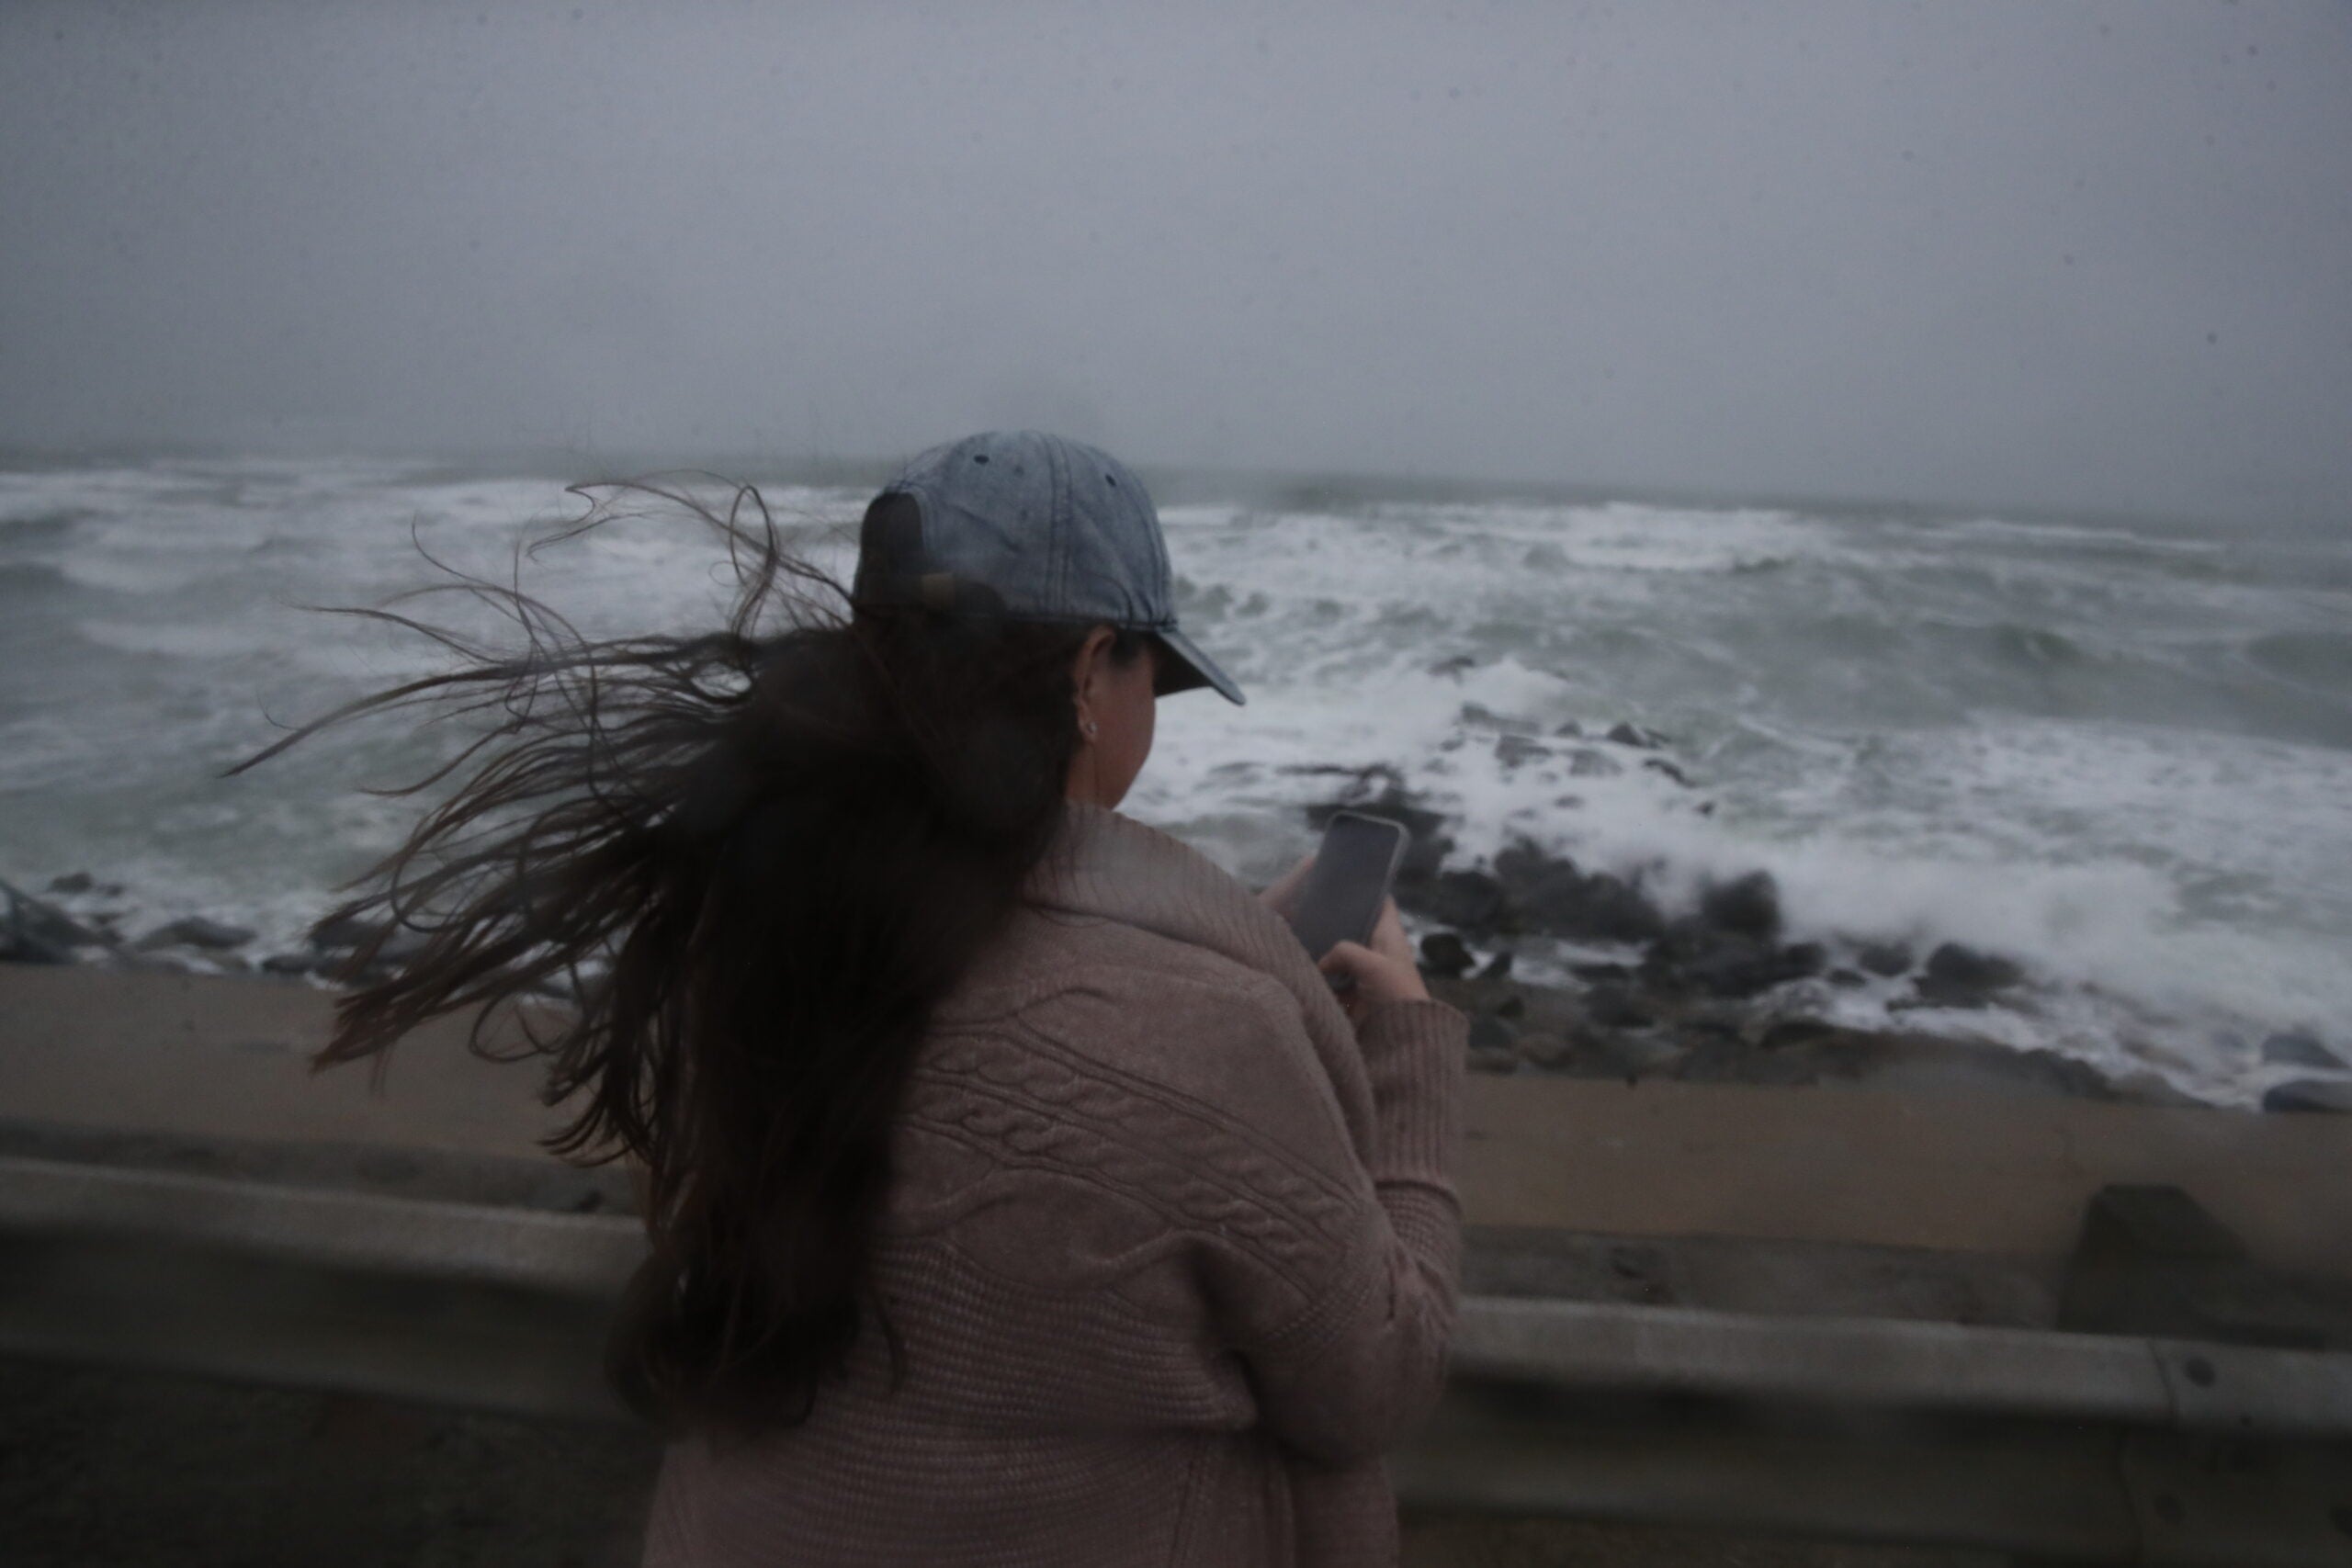 Taking photos of the surf at the seawall in Marshfield.